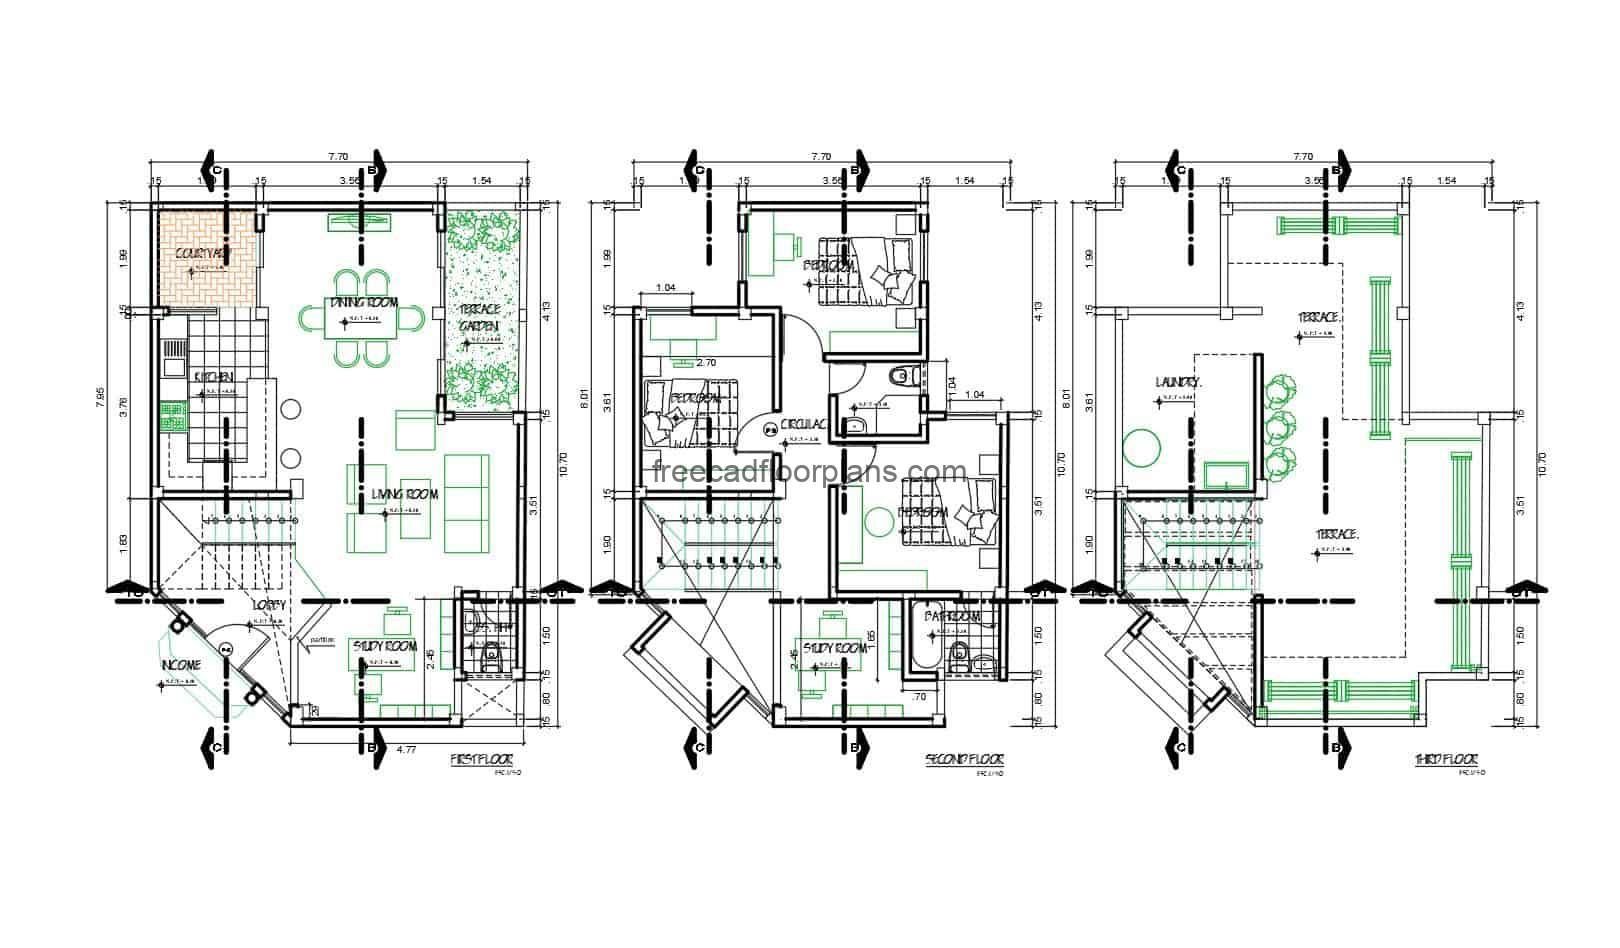 Residence of two levels with roof, modern style floor with defined furniture, architectural plants, dimensioned, elevations and sections in Autocad DWG format for free download.